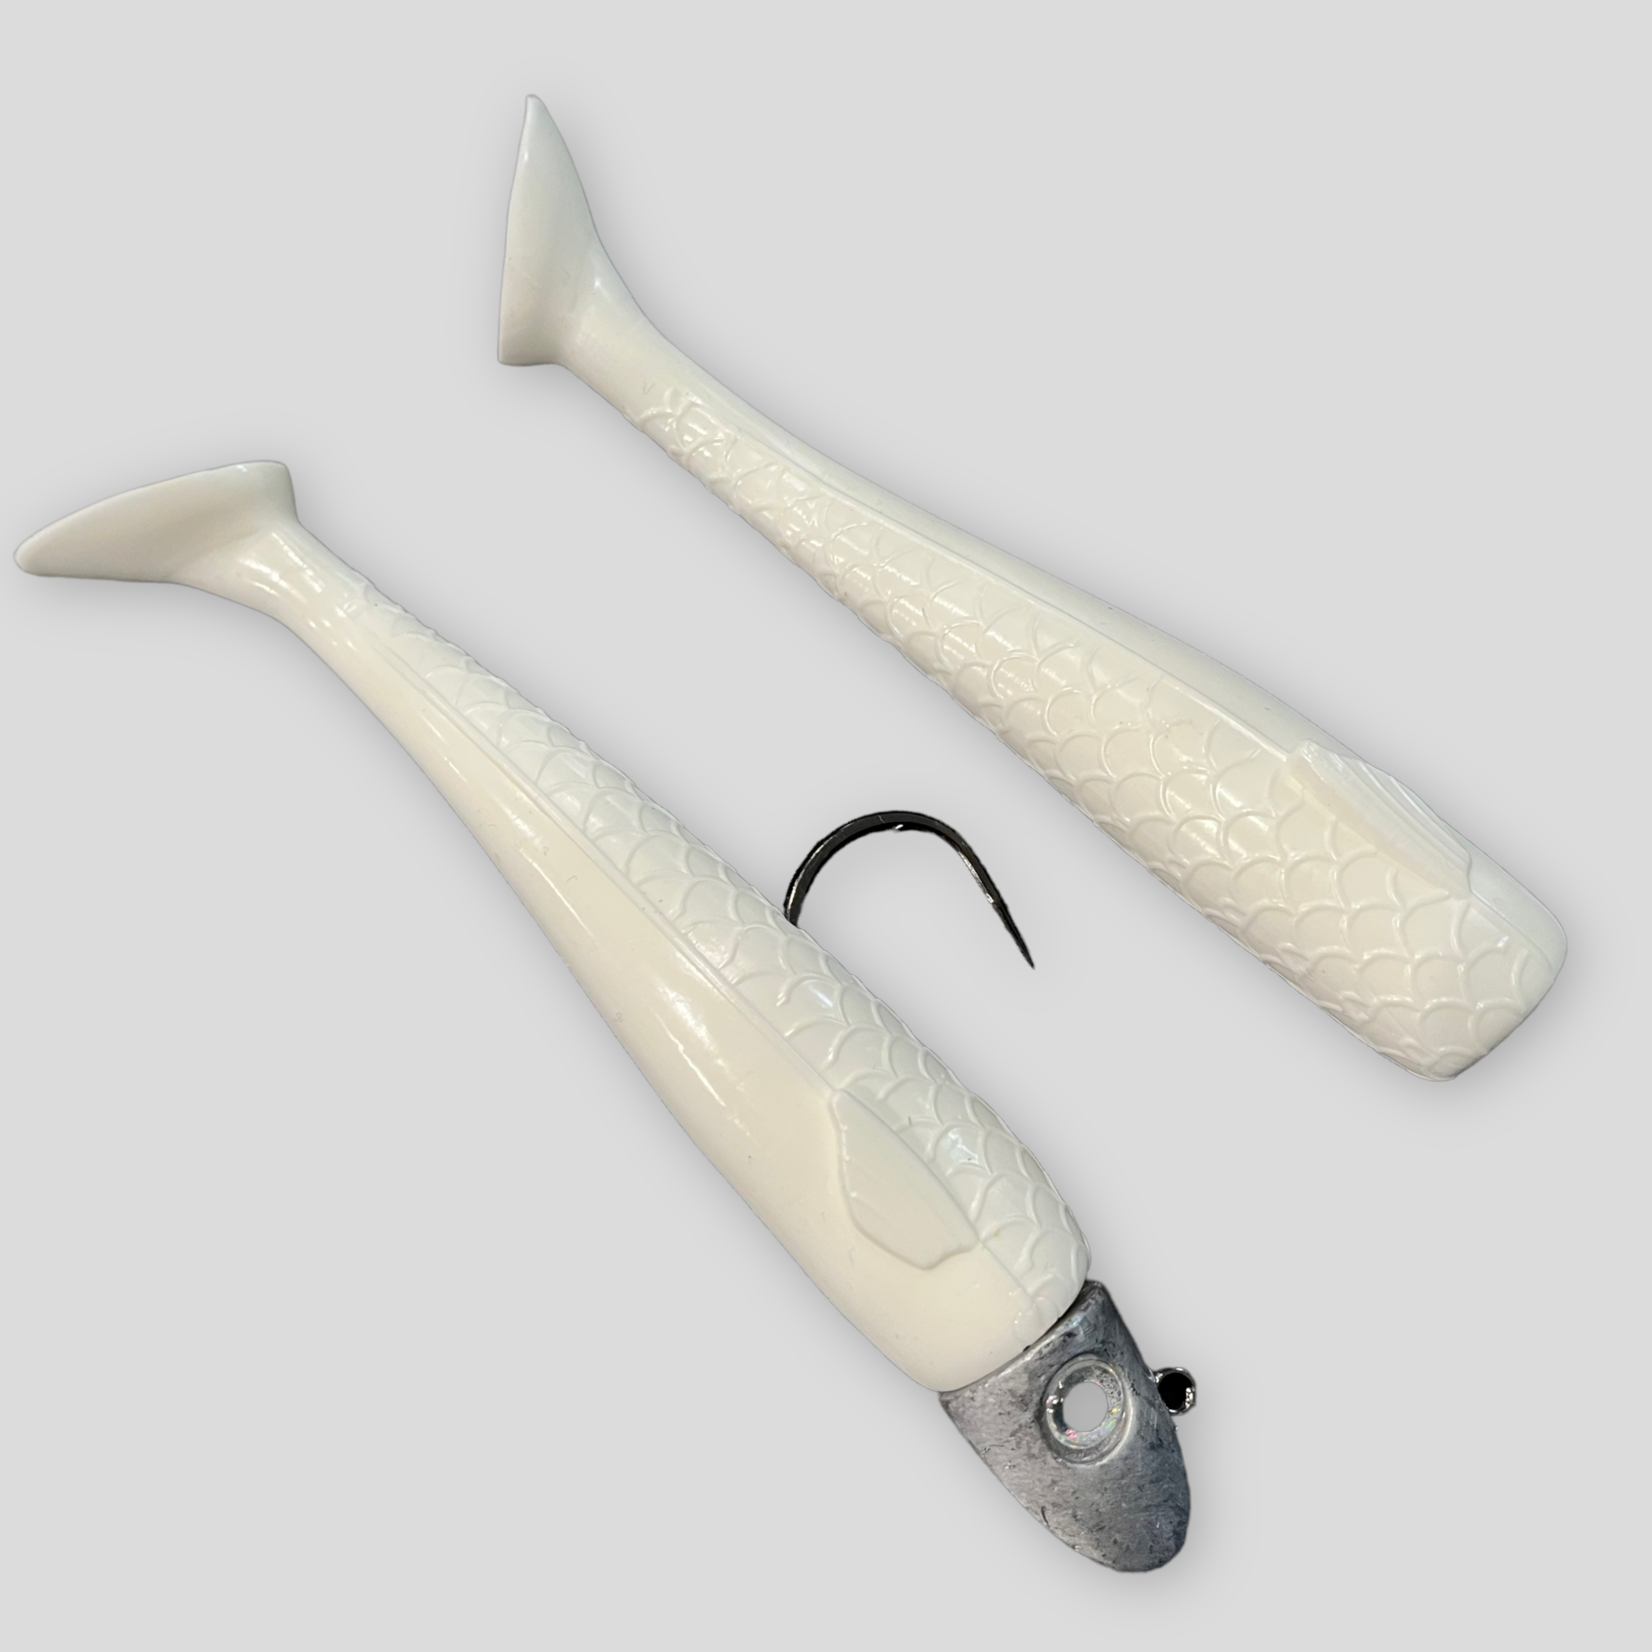 RonZ Lures RonZ Z-Fin Paddle Tail 5